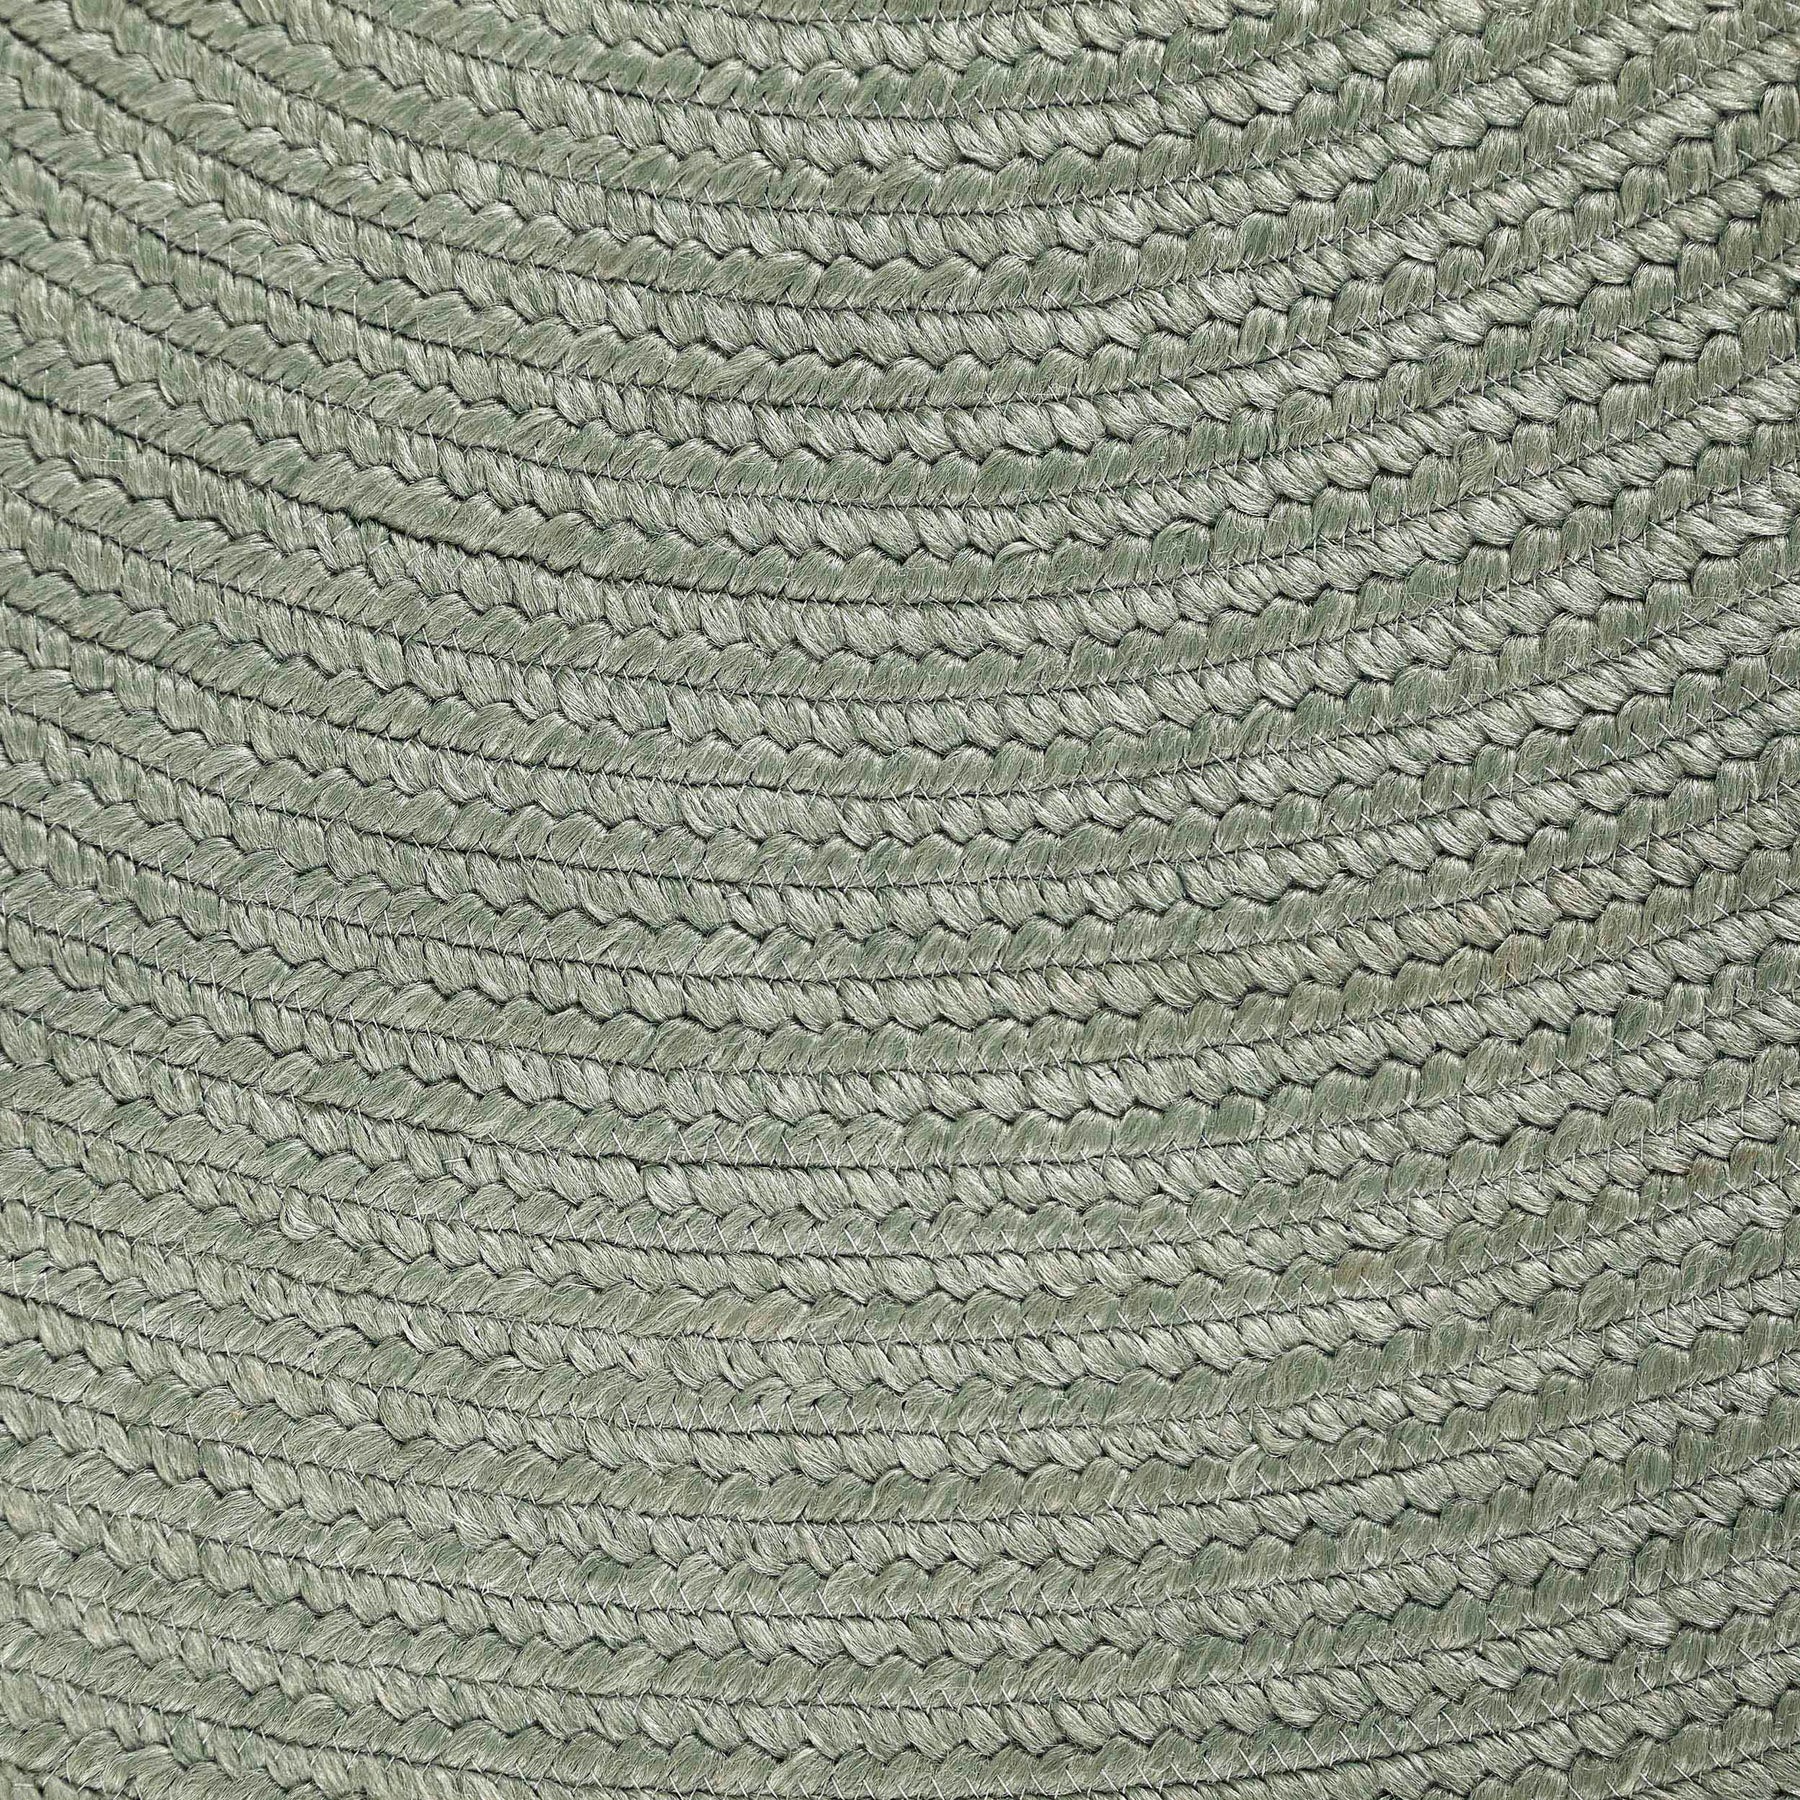 Classic Braided Weave Oval Area Rug Indoor Outdoor Rugs - FogGreen